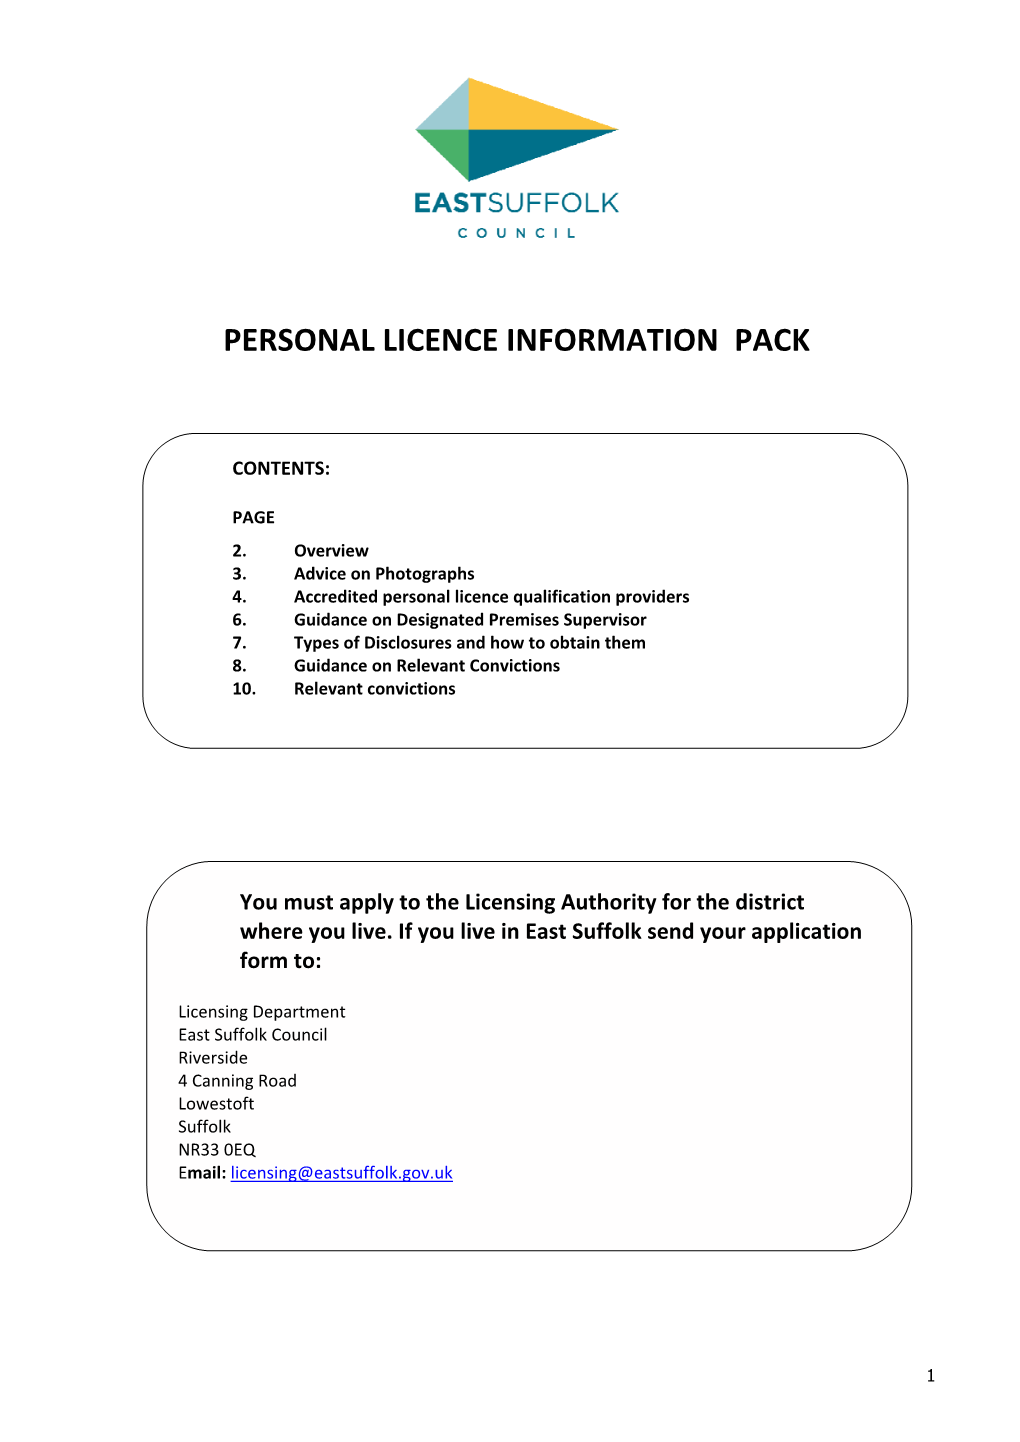 Personal Licence Information Pack